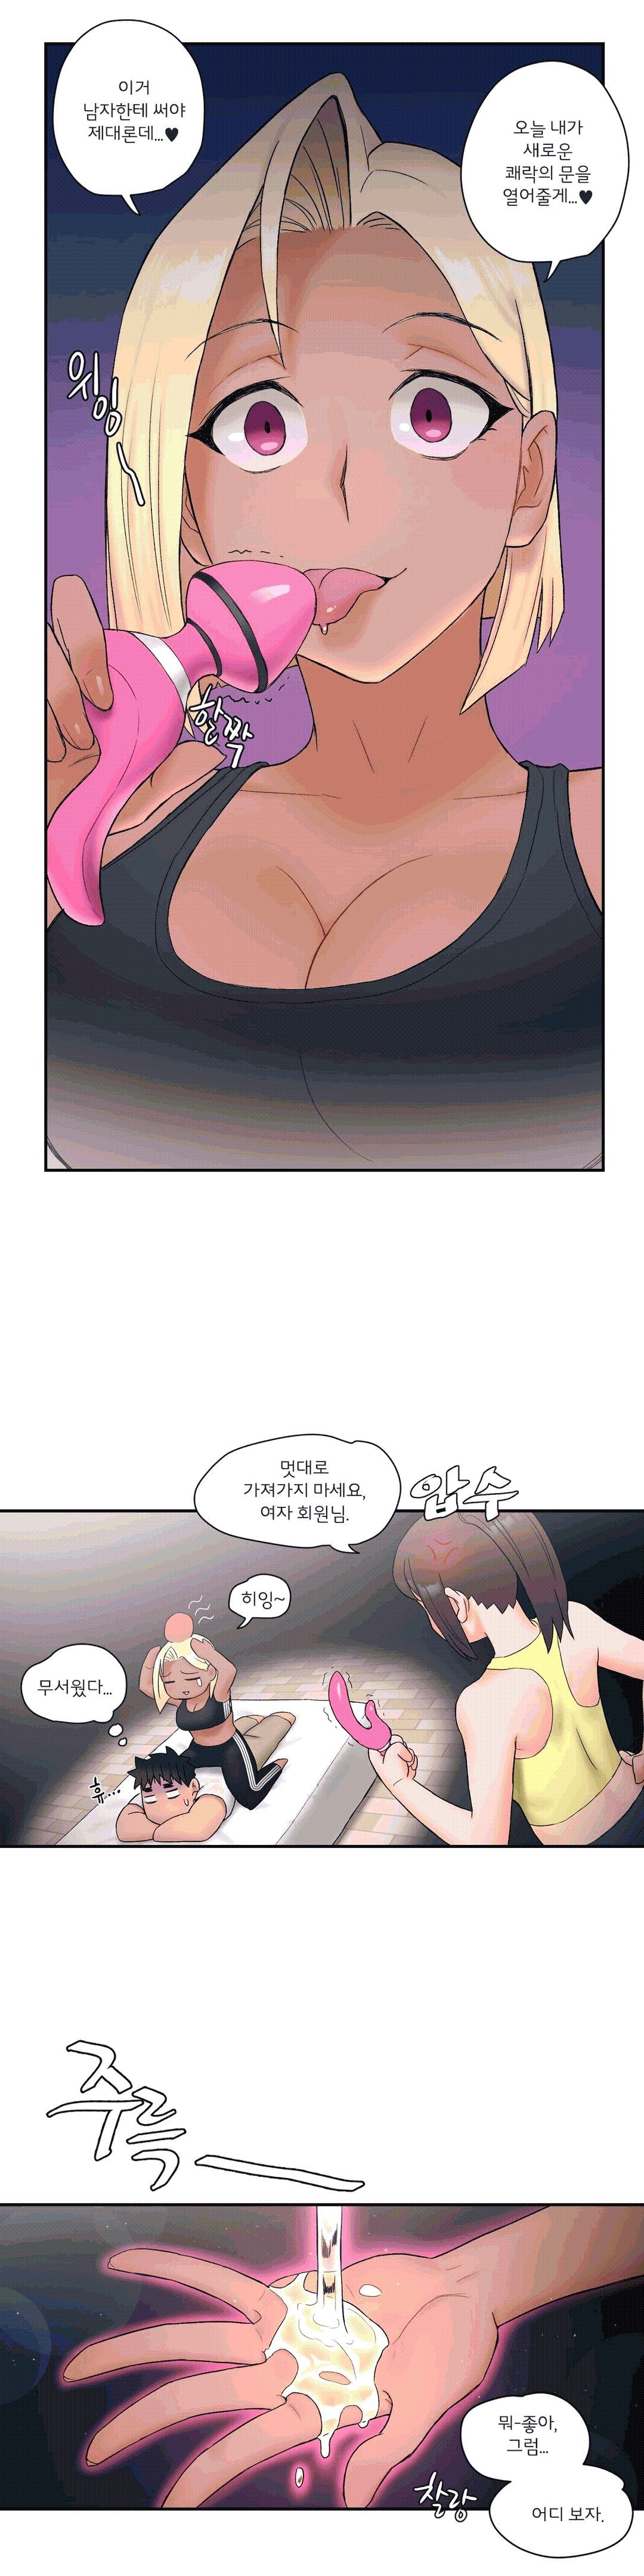 Sexercise Raw - Chapter 11 Page 19